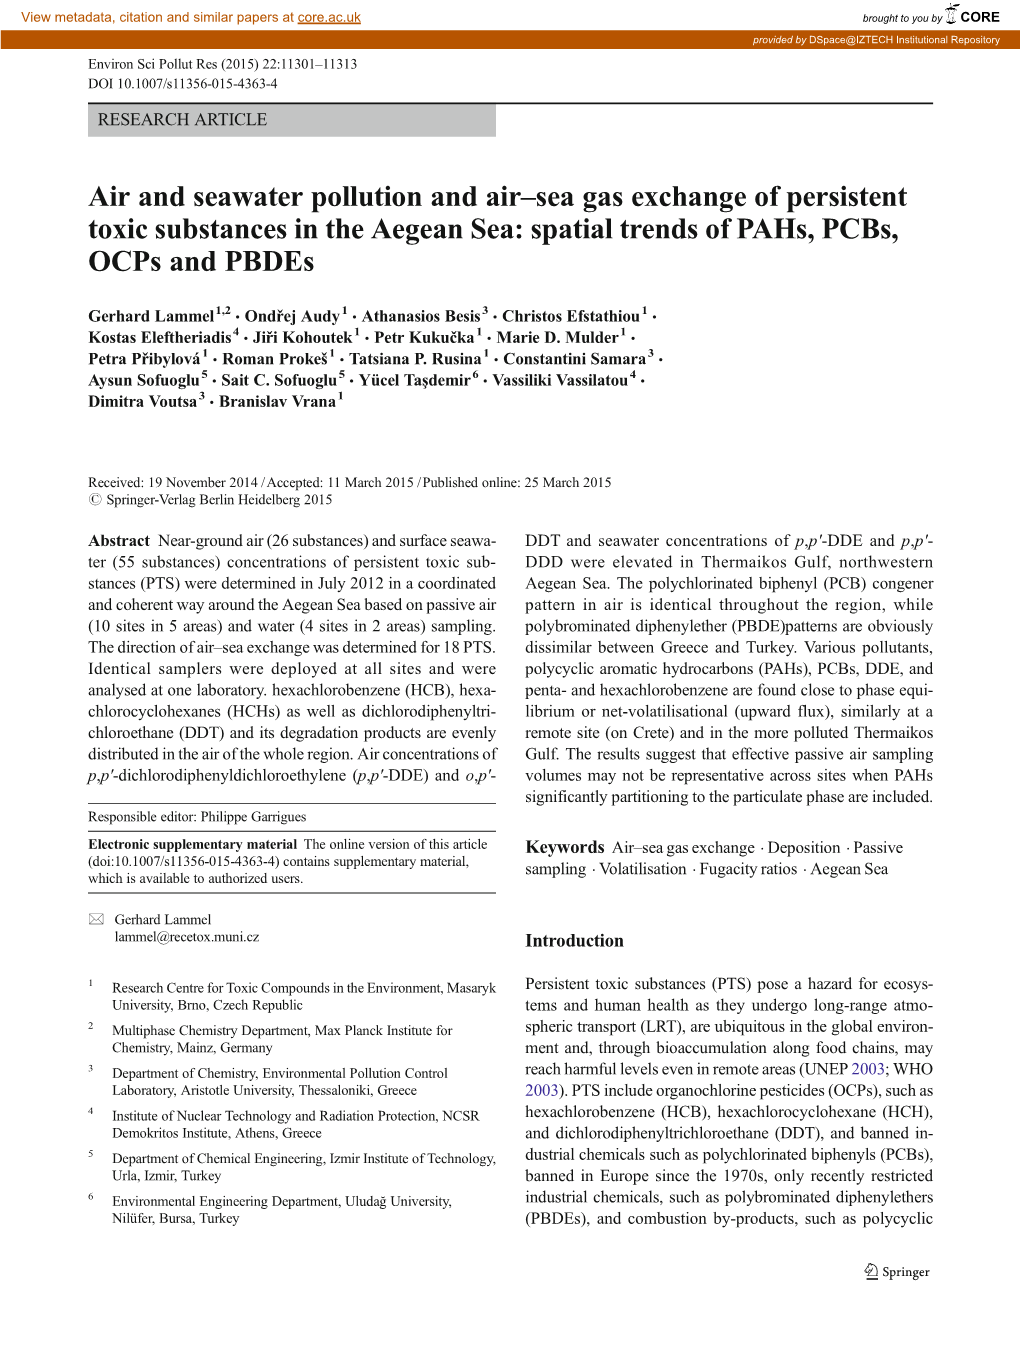 Air and Seawater Pollution and Air–Sea Gas Exchange of Persistent Toxic Substances in the Aegean Sea: Spatial Trends of Pahs, Pcbs, Ocps and Pbdes